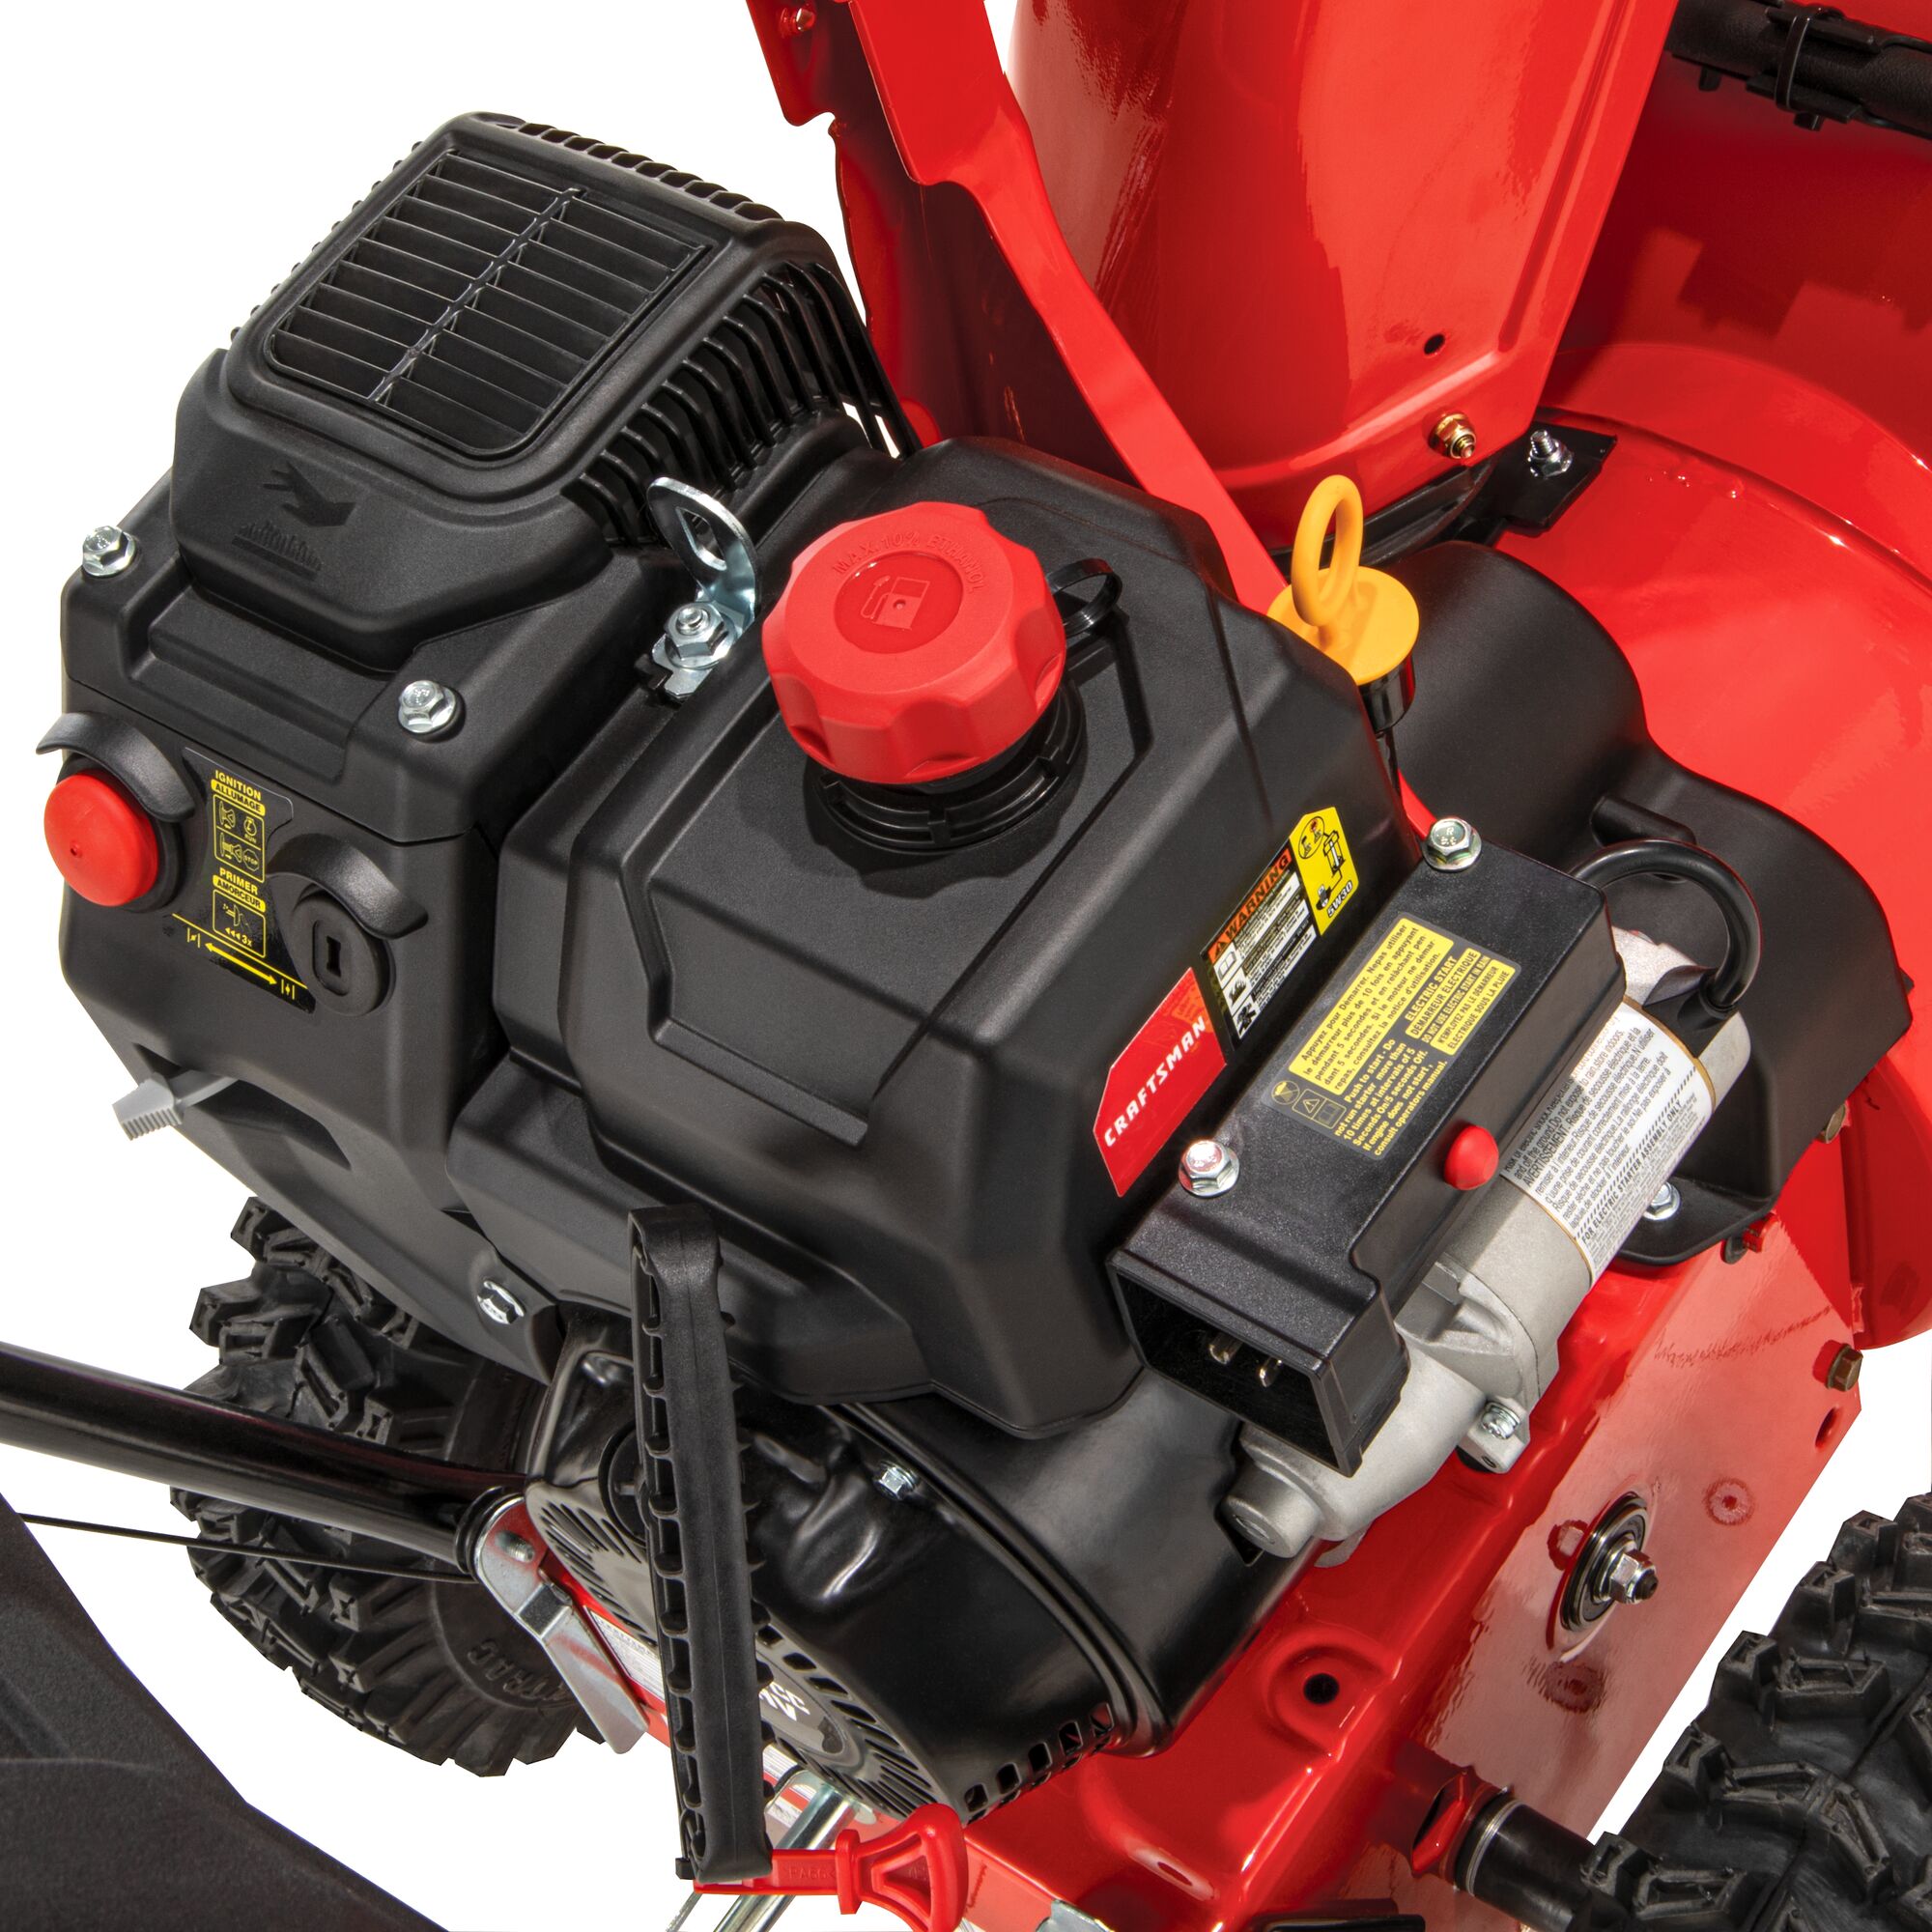 High performance engine feature in SELECT 26 inch 243 CC two stage gas snow blower with push button electric start.